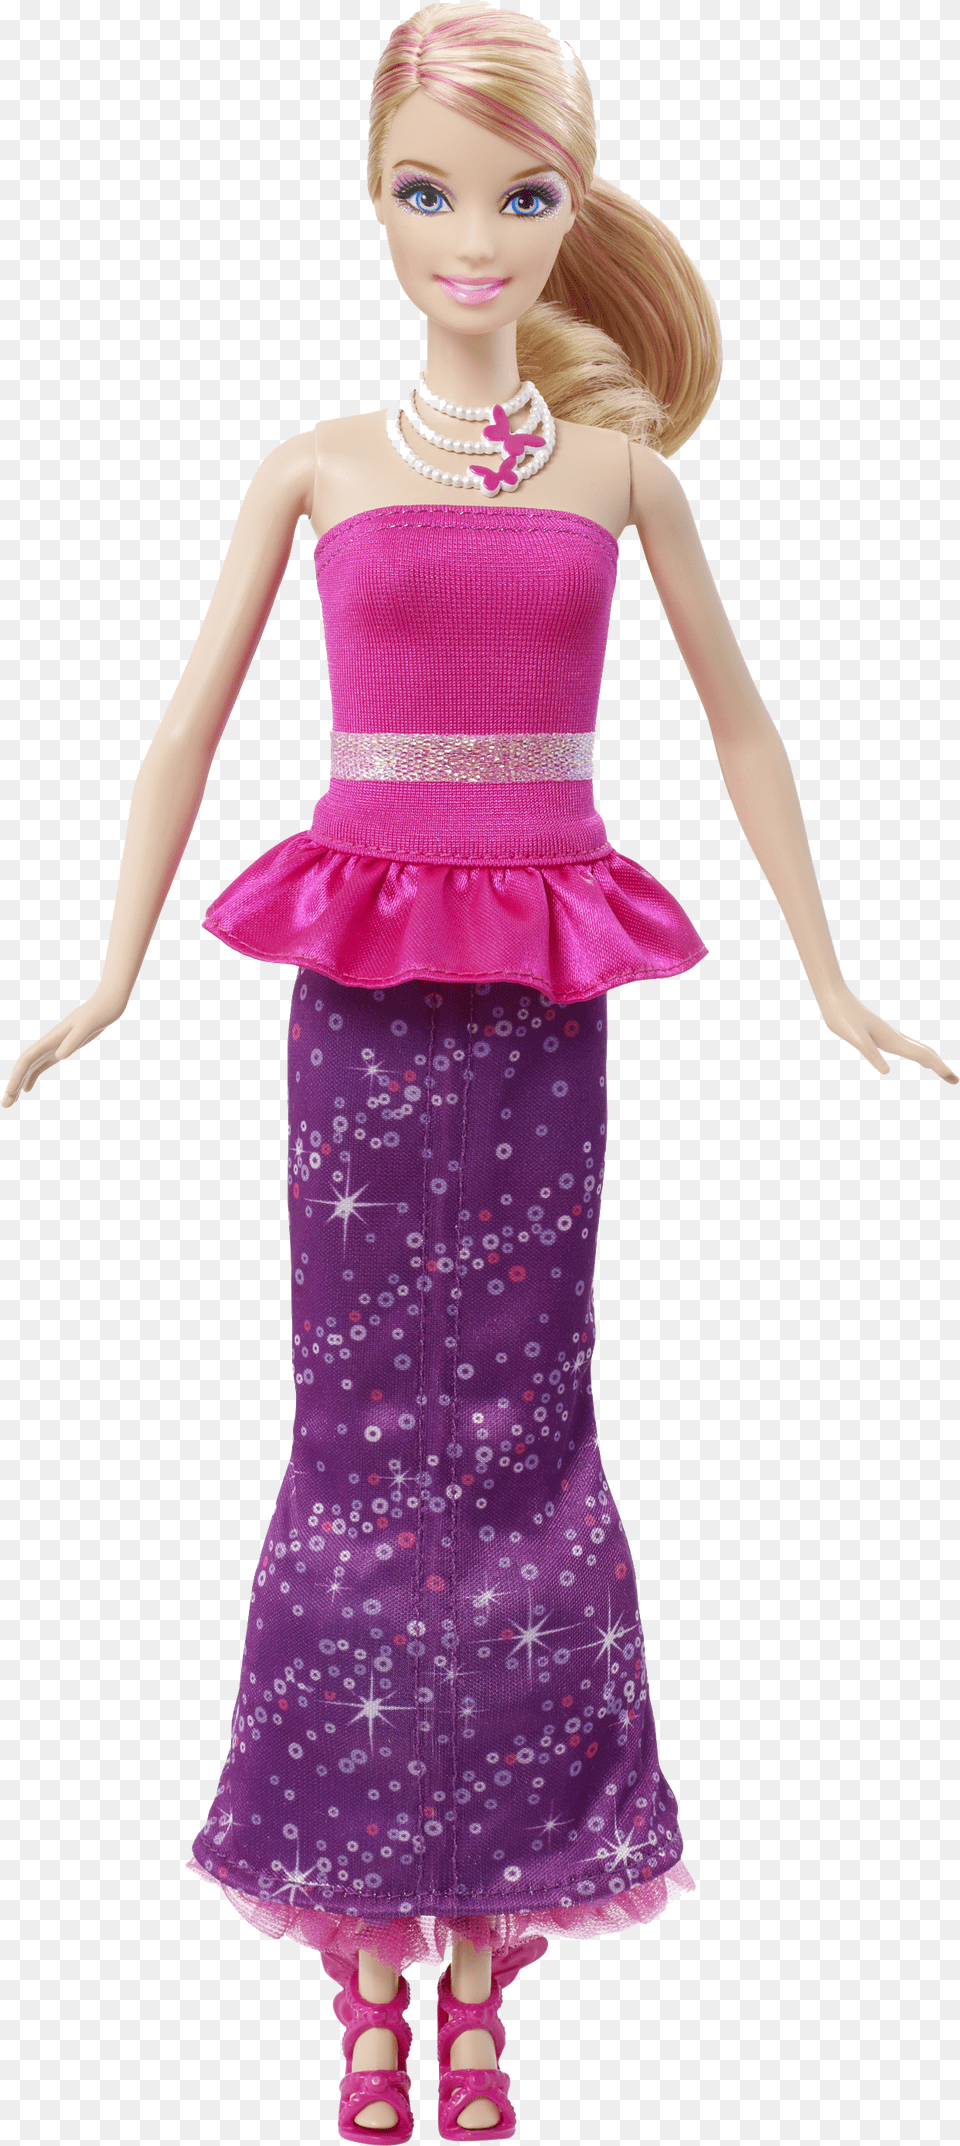 Barbie Doll Transparent Images Barbie Doll Transparent Background, Toy, Person, Girl, Female Png Image